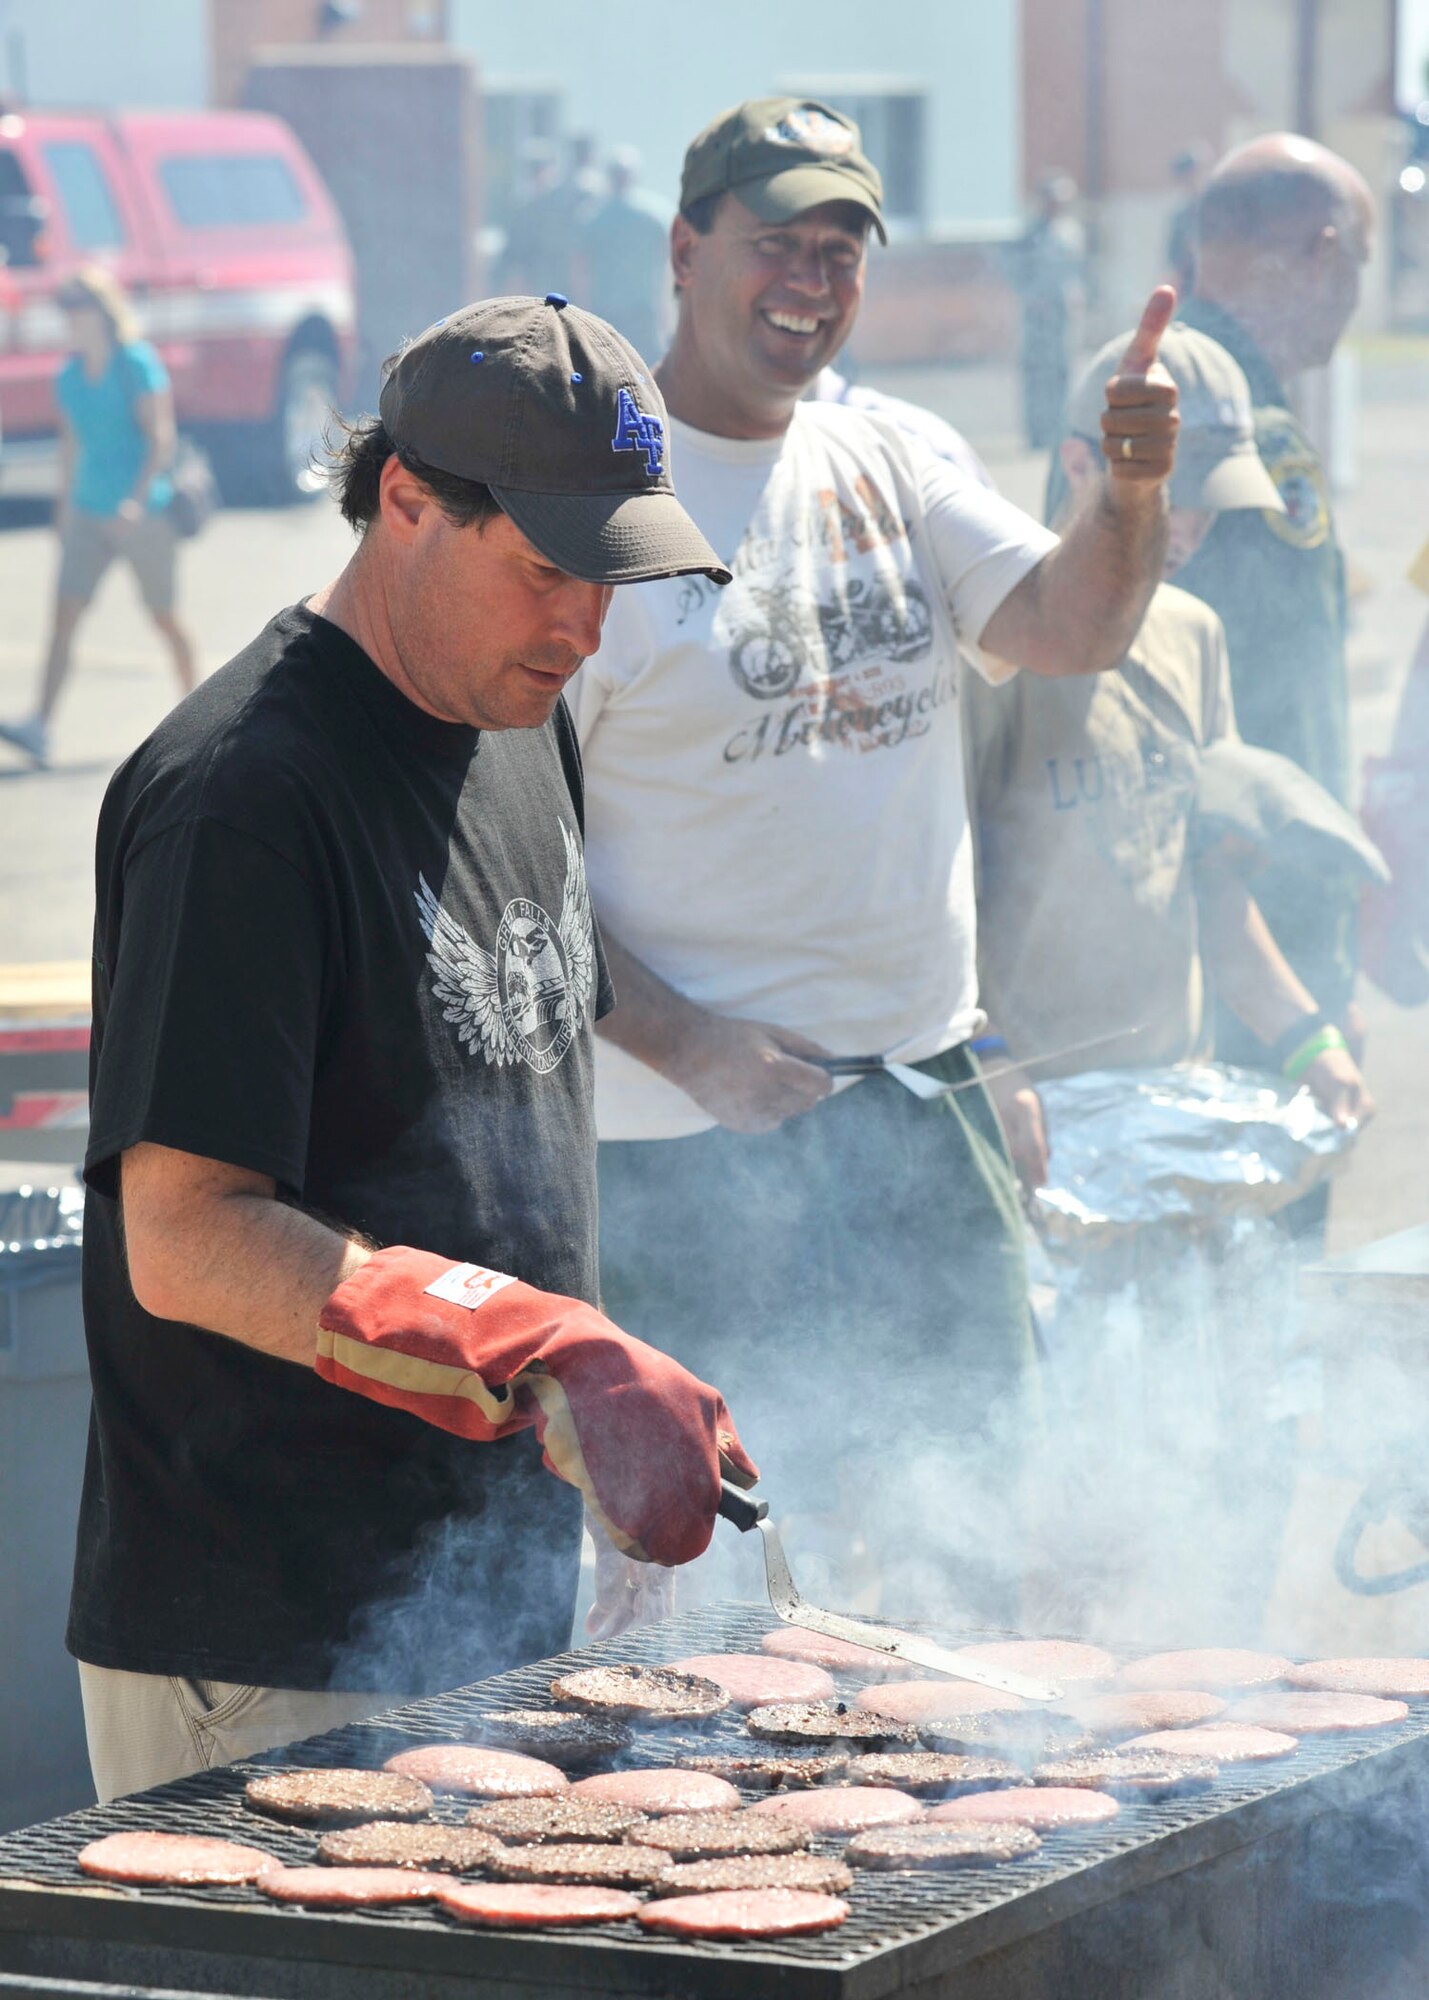 Members of the Great Falls Area Chamber of Commerce Military Affairs Committee cook the food served during the Montana Air National Guard Family Day picnic on Aug. 11, 2012. (U.S. Air Force photo/Staff Sgt. John Turner)